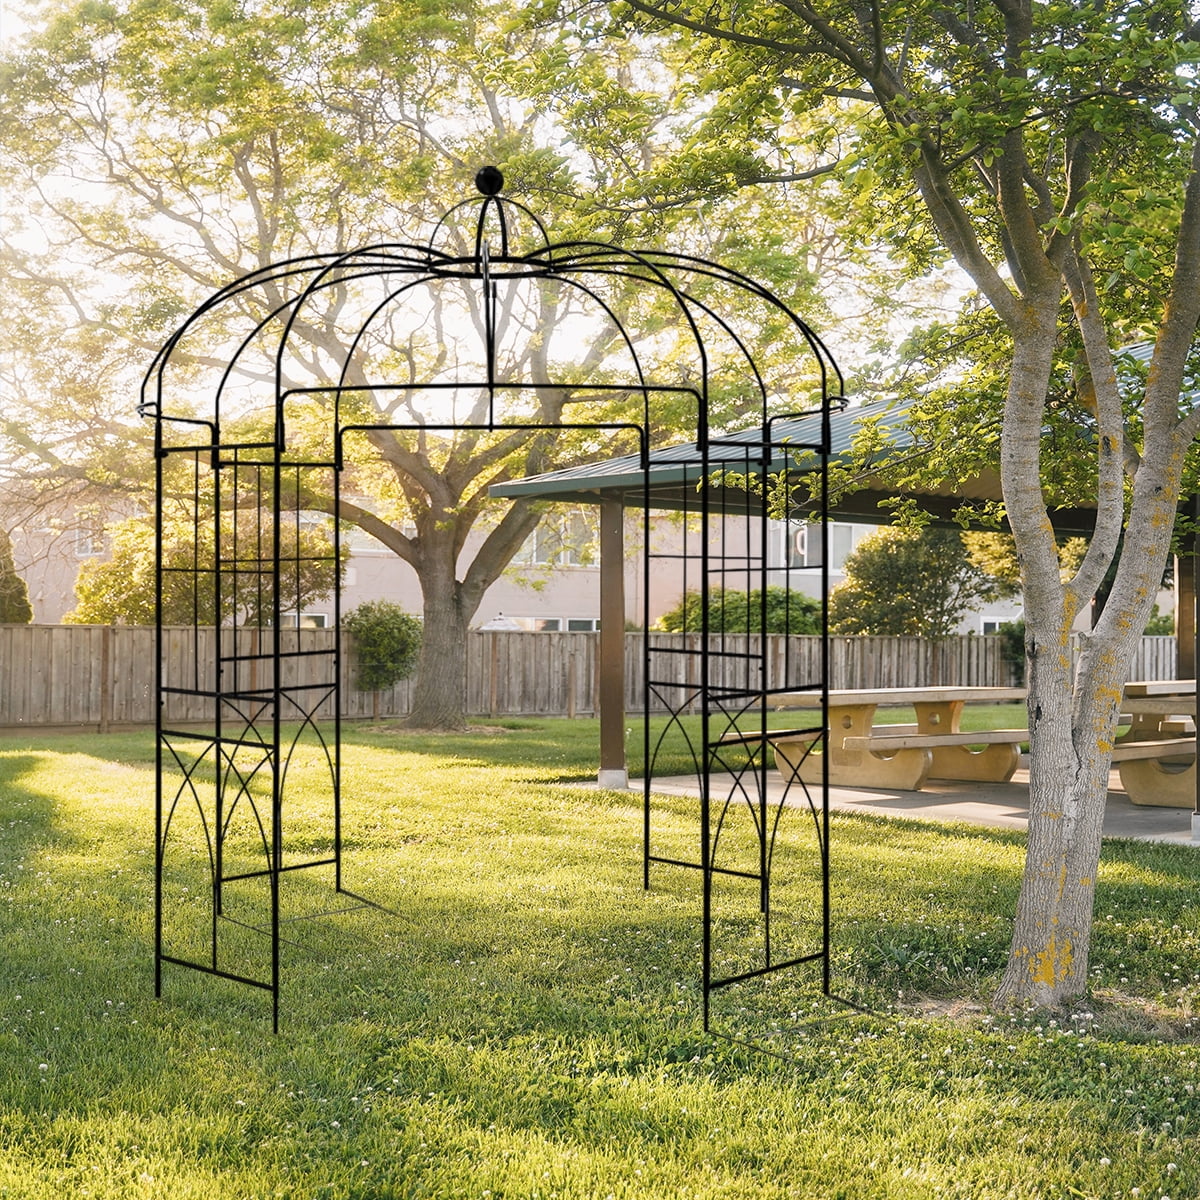 Outdoor Plant Climbing Support Trellis Metal Garden Arch Pergola Arbor Wedding Assemble Freely for Various Climbing Plant Roses Vines Bridal Party 